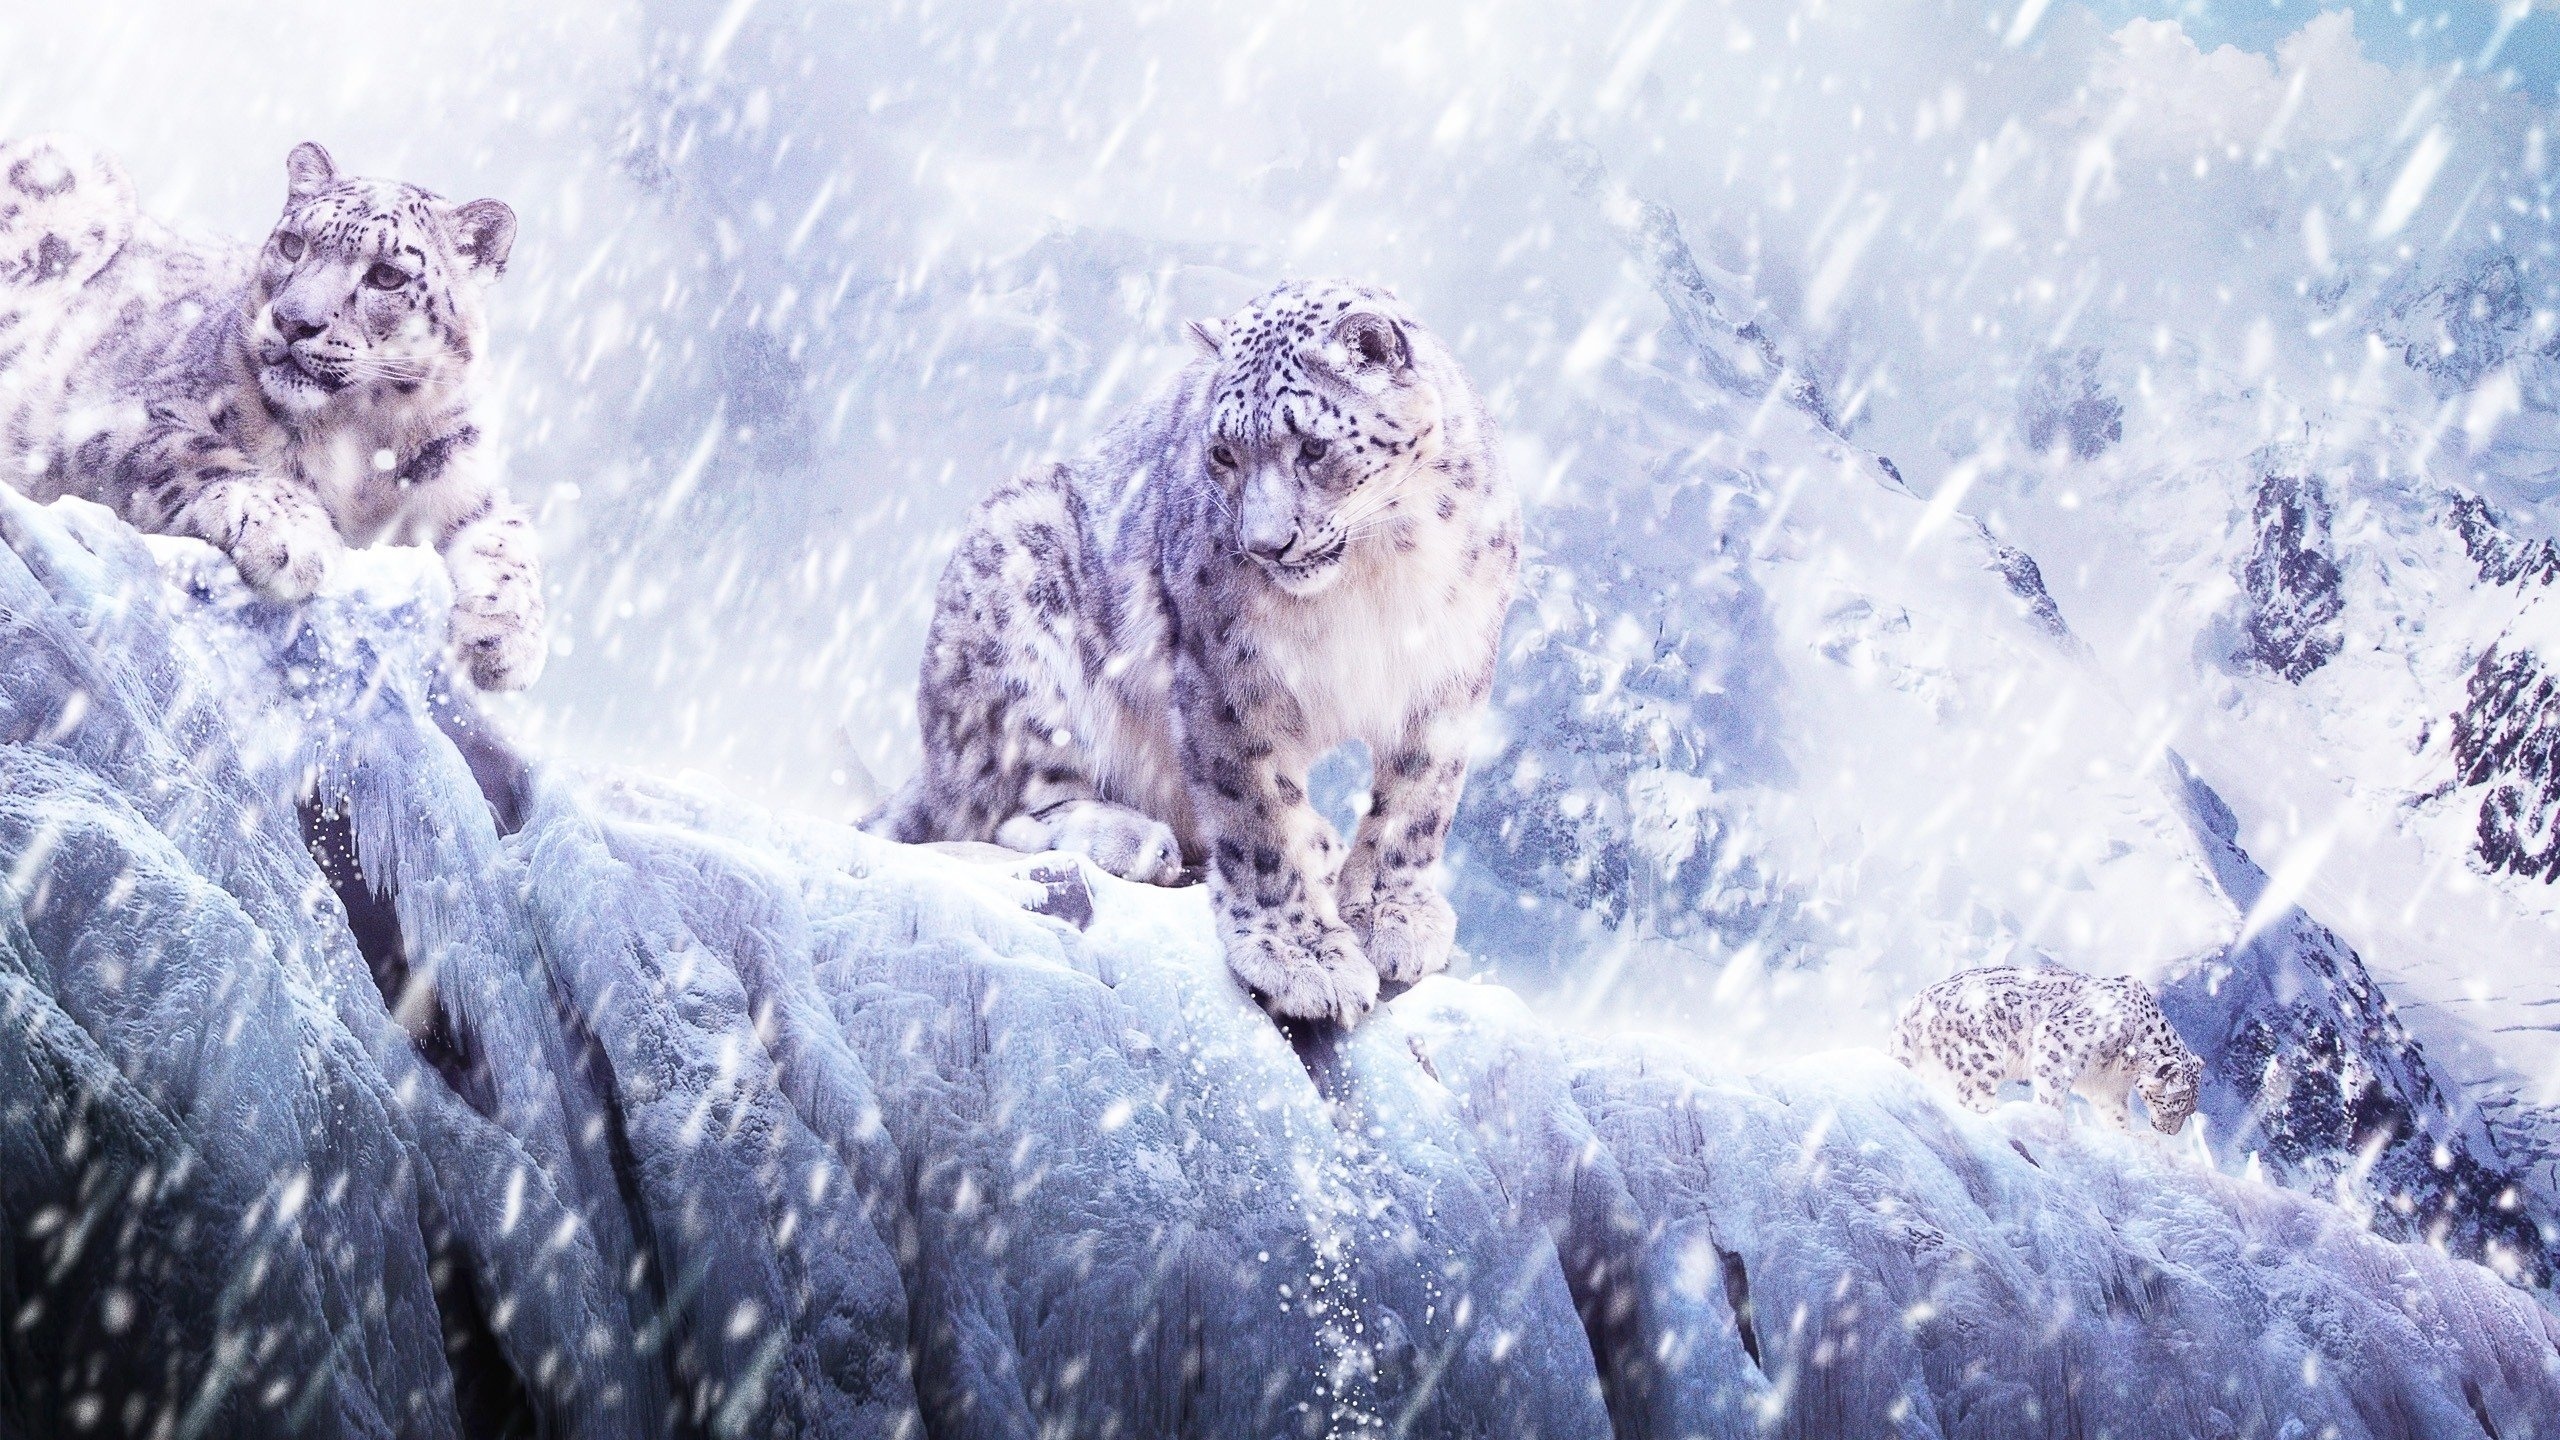 39529 download wallpaper snow leopard, animals, blue screensavers and pictures for free